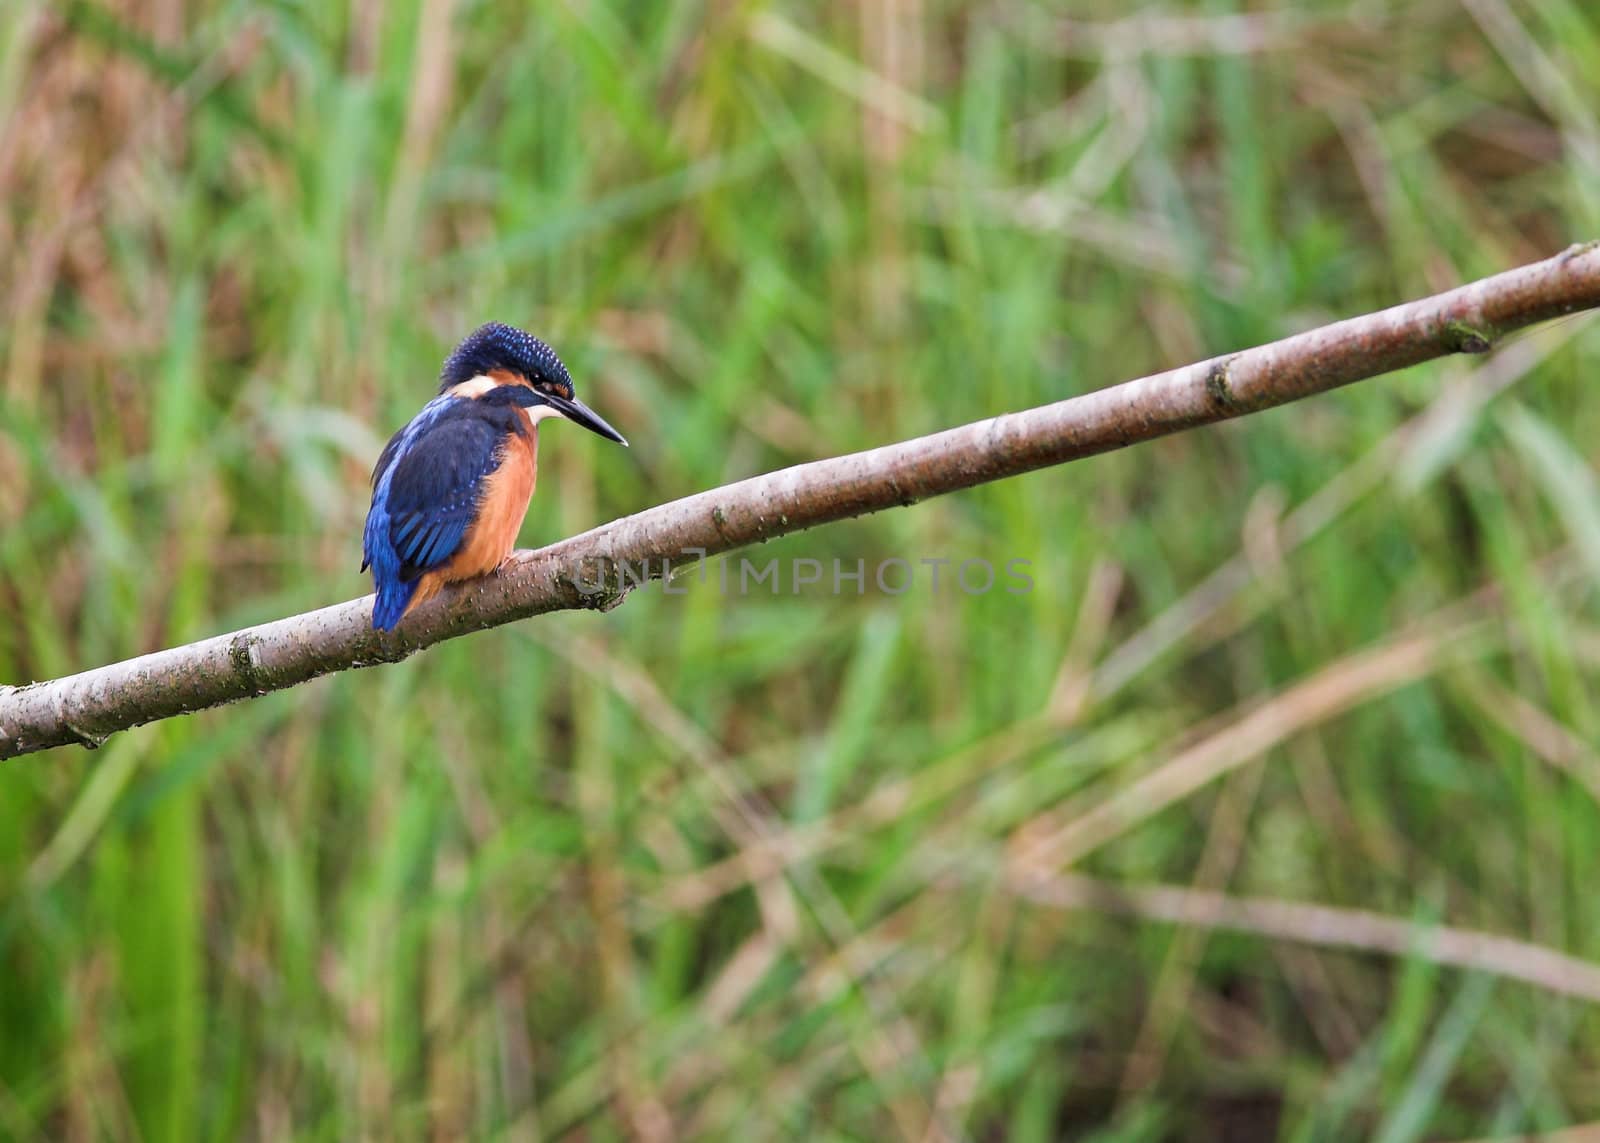 A kingfisher - Alcedo atthis - perched on a branch, reeds in the background.